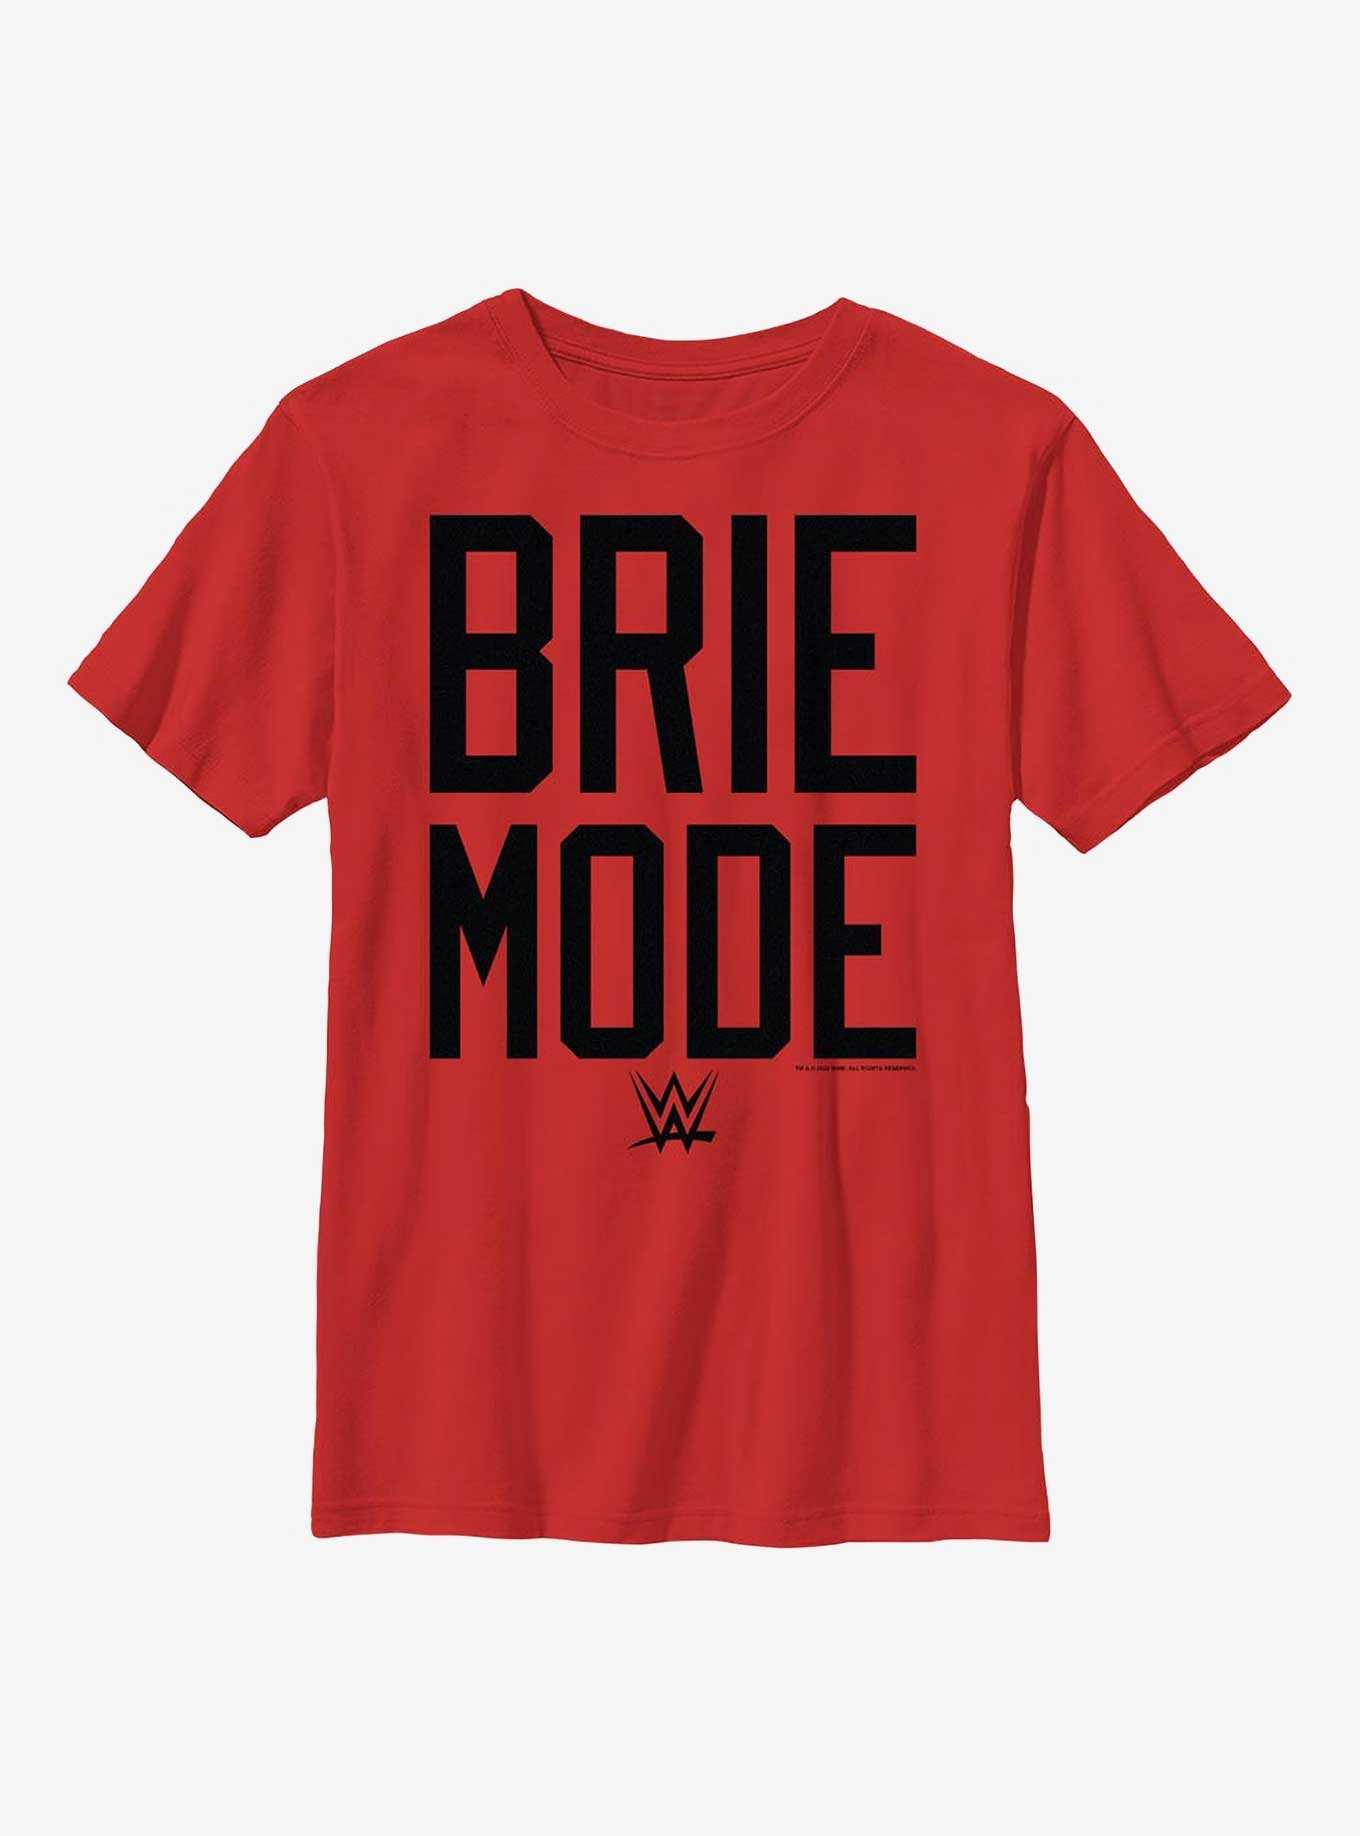 WWE The Bella Twins Brie Bella Brie Mode Youth T-Shirt, , hi-res